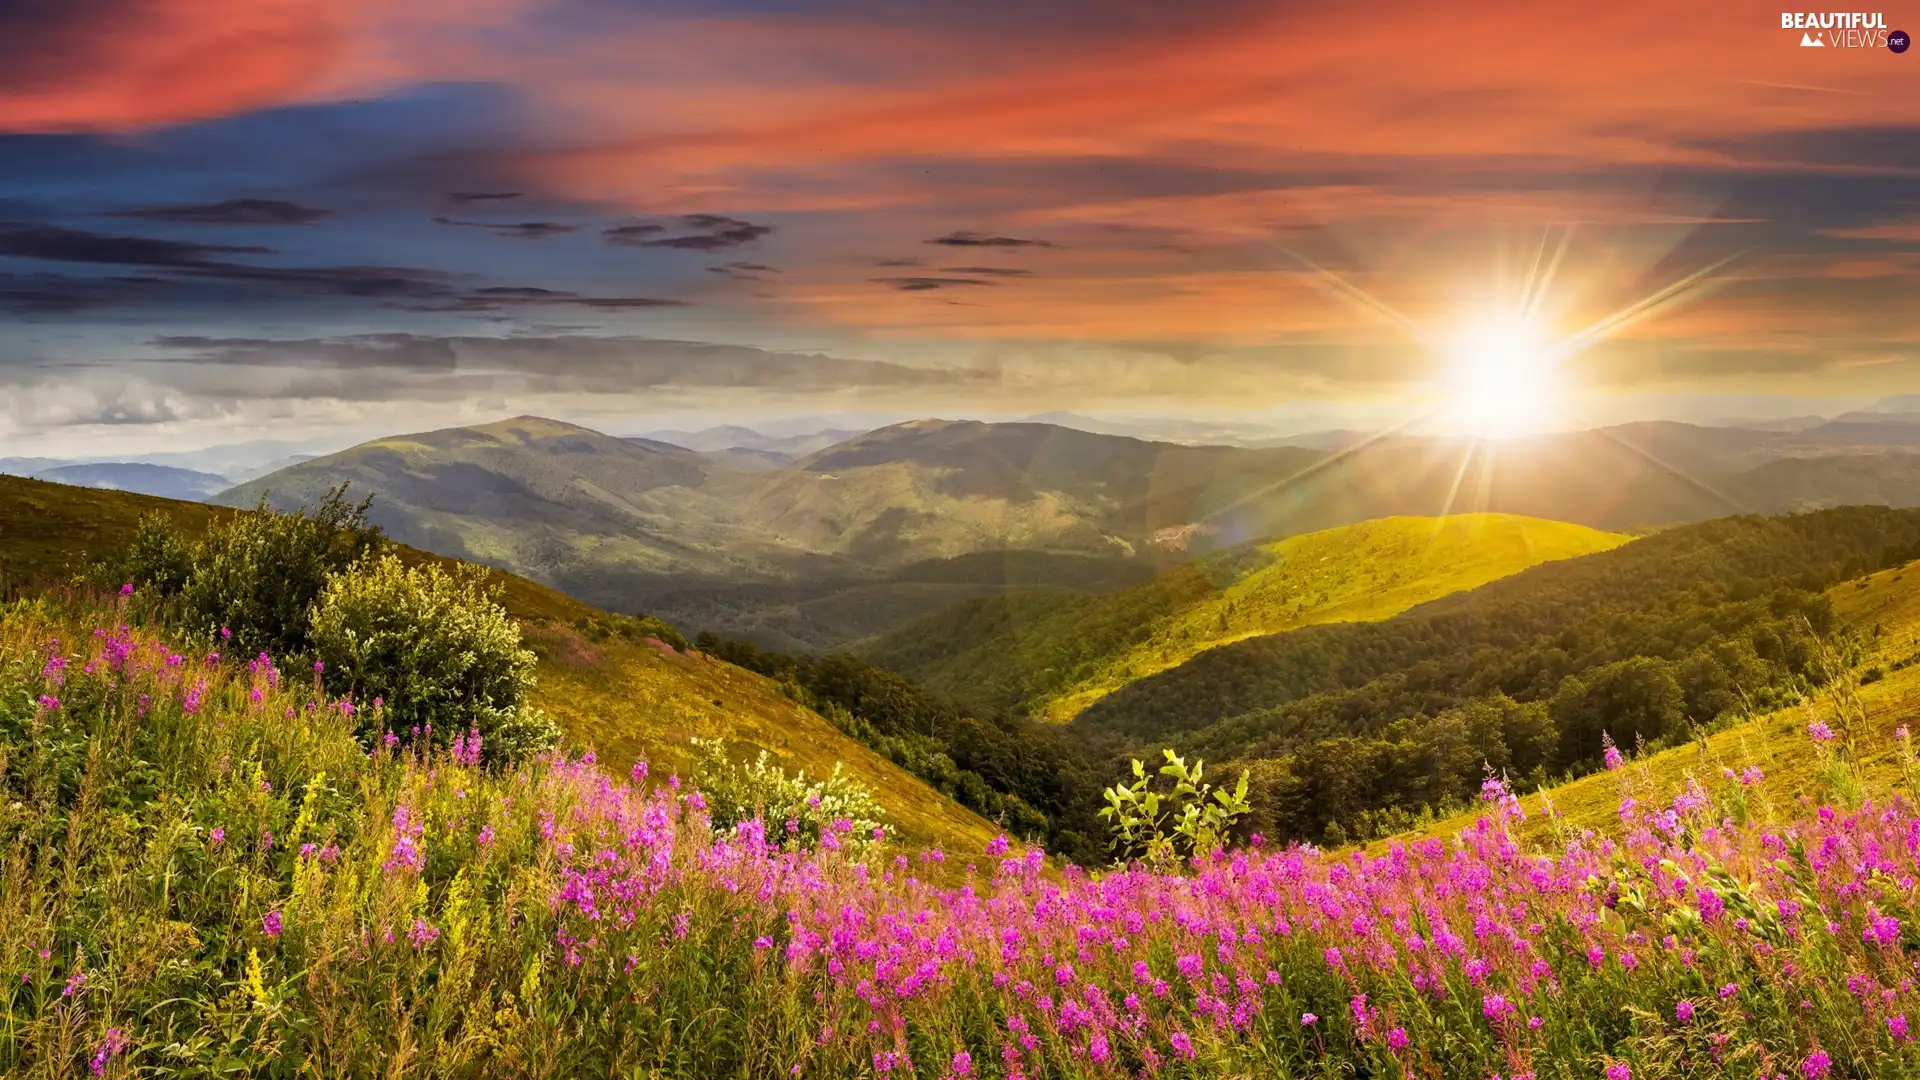 VEGETATION, rays of the Sun, Valley, Flowers, Mountains